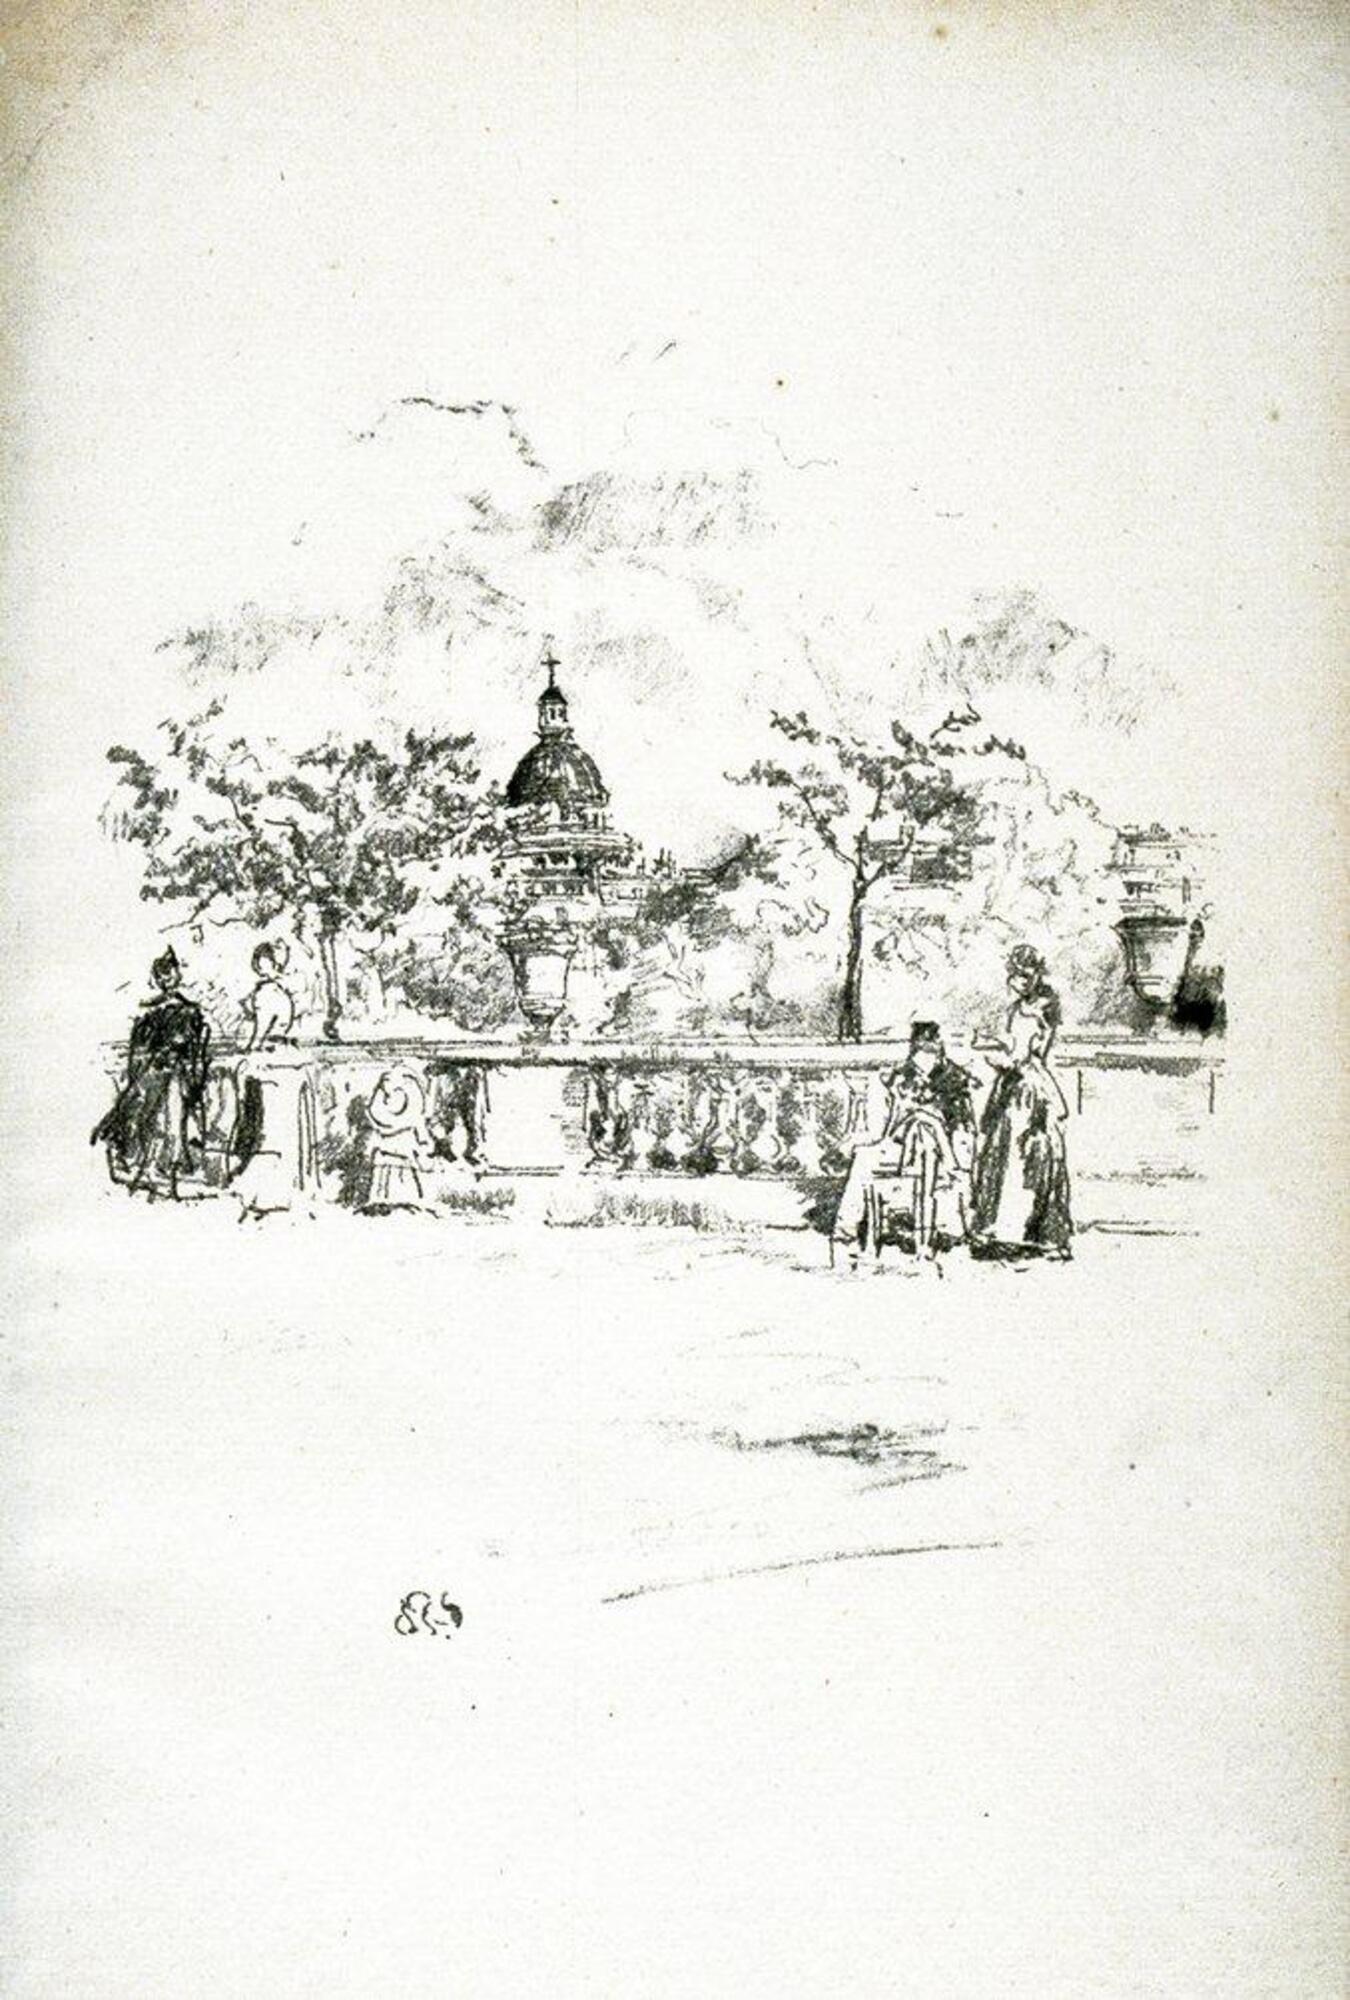 The balustrade of a public park walkway seen at a slight distance acts as a foil for several figures grouped in front of the balustrade. To the left, two women stand talking while a child, with her back facing the viewer looks between the balusters towards the dome of a building in the distance beyond some trees. Too the right of the composition, a seated man and a woman shown in profile are grouped. Two ornamental urns decorate the balustrade.